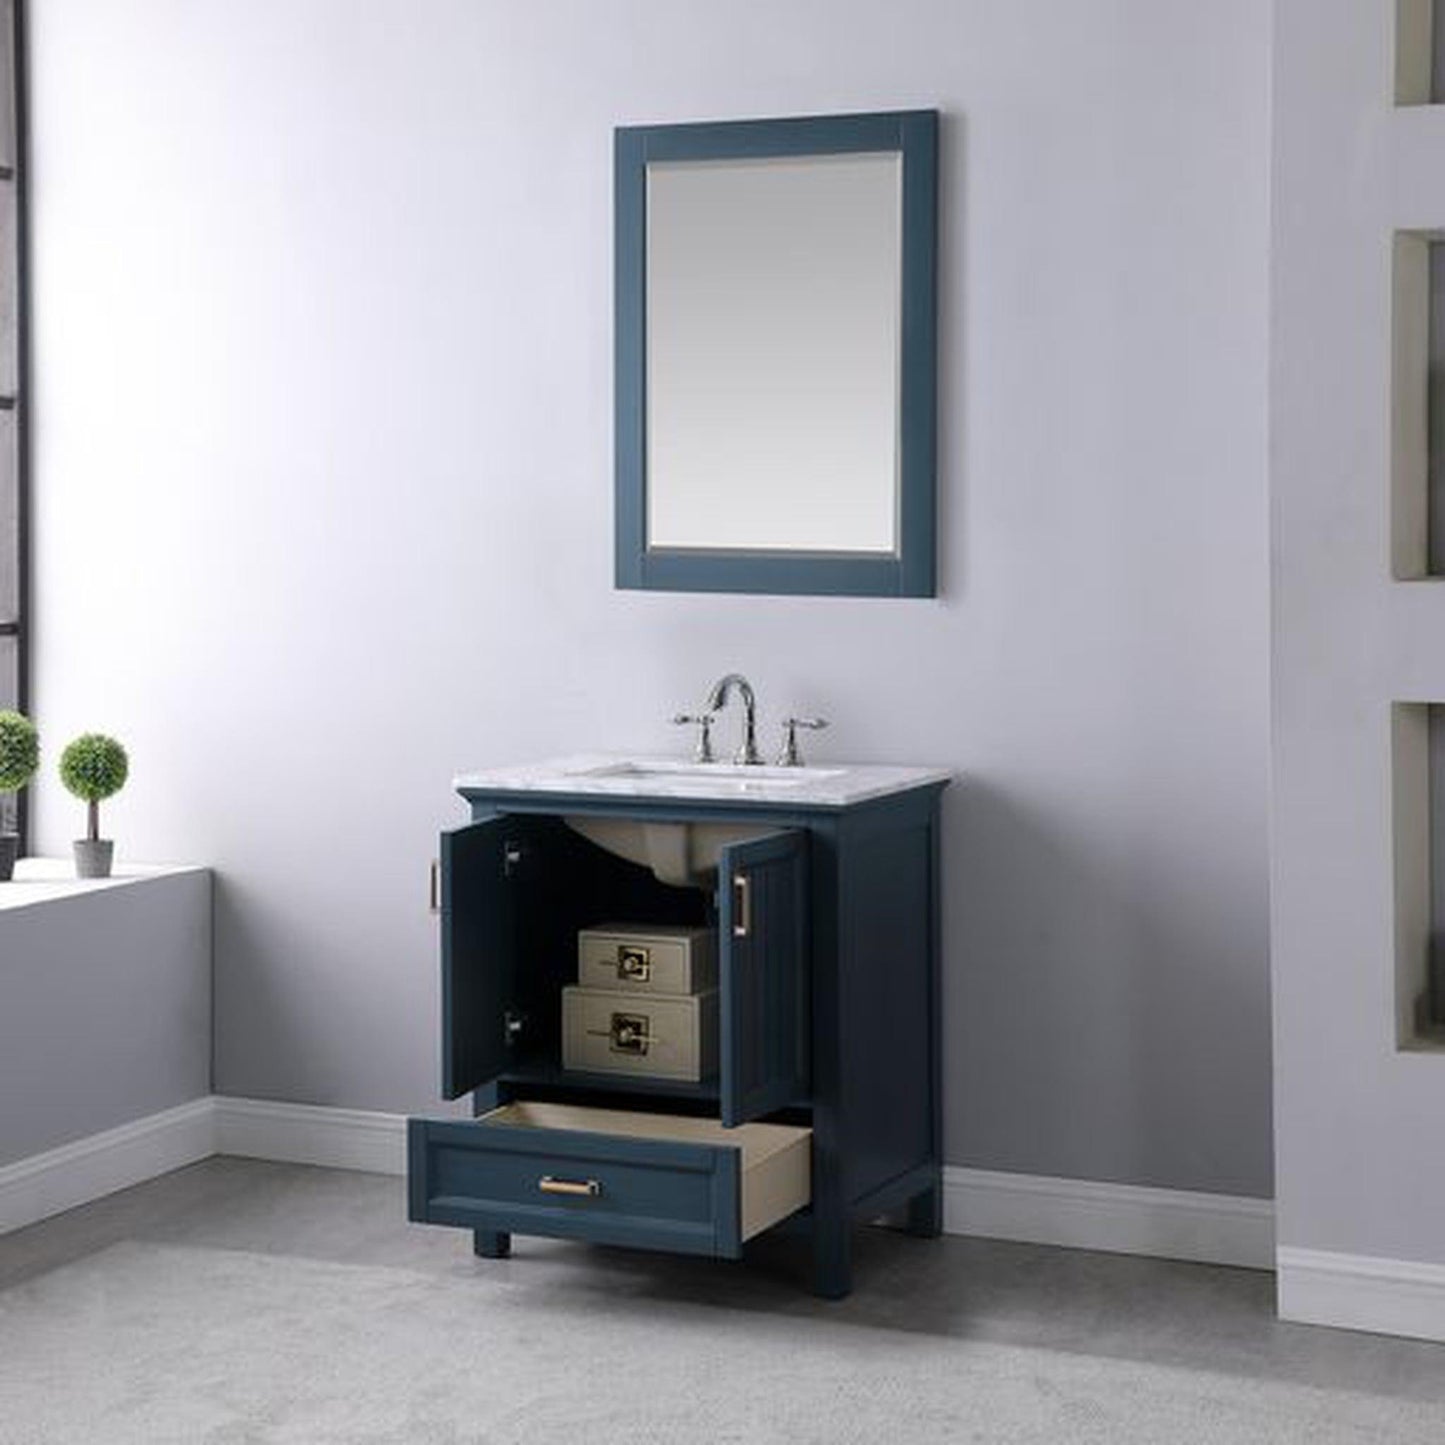 Altair Isla 30" Single Classic Blue Freestanding Bathroom Vanity Set With Mirror, Natural Carrara White Marble Top, Rectangular Undermount Ceramic Sink, and Overflow